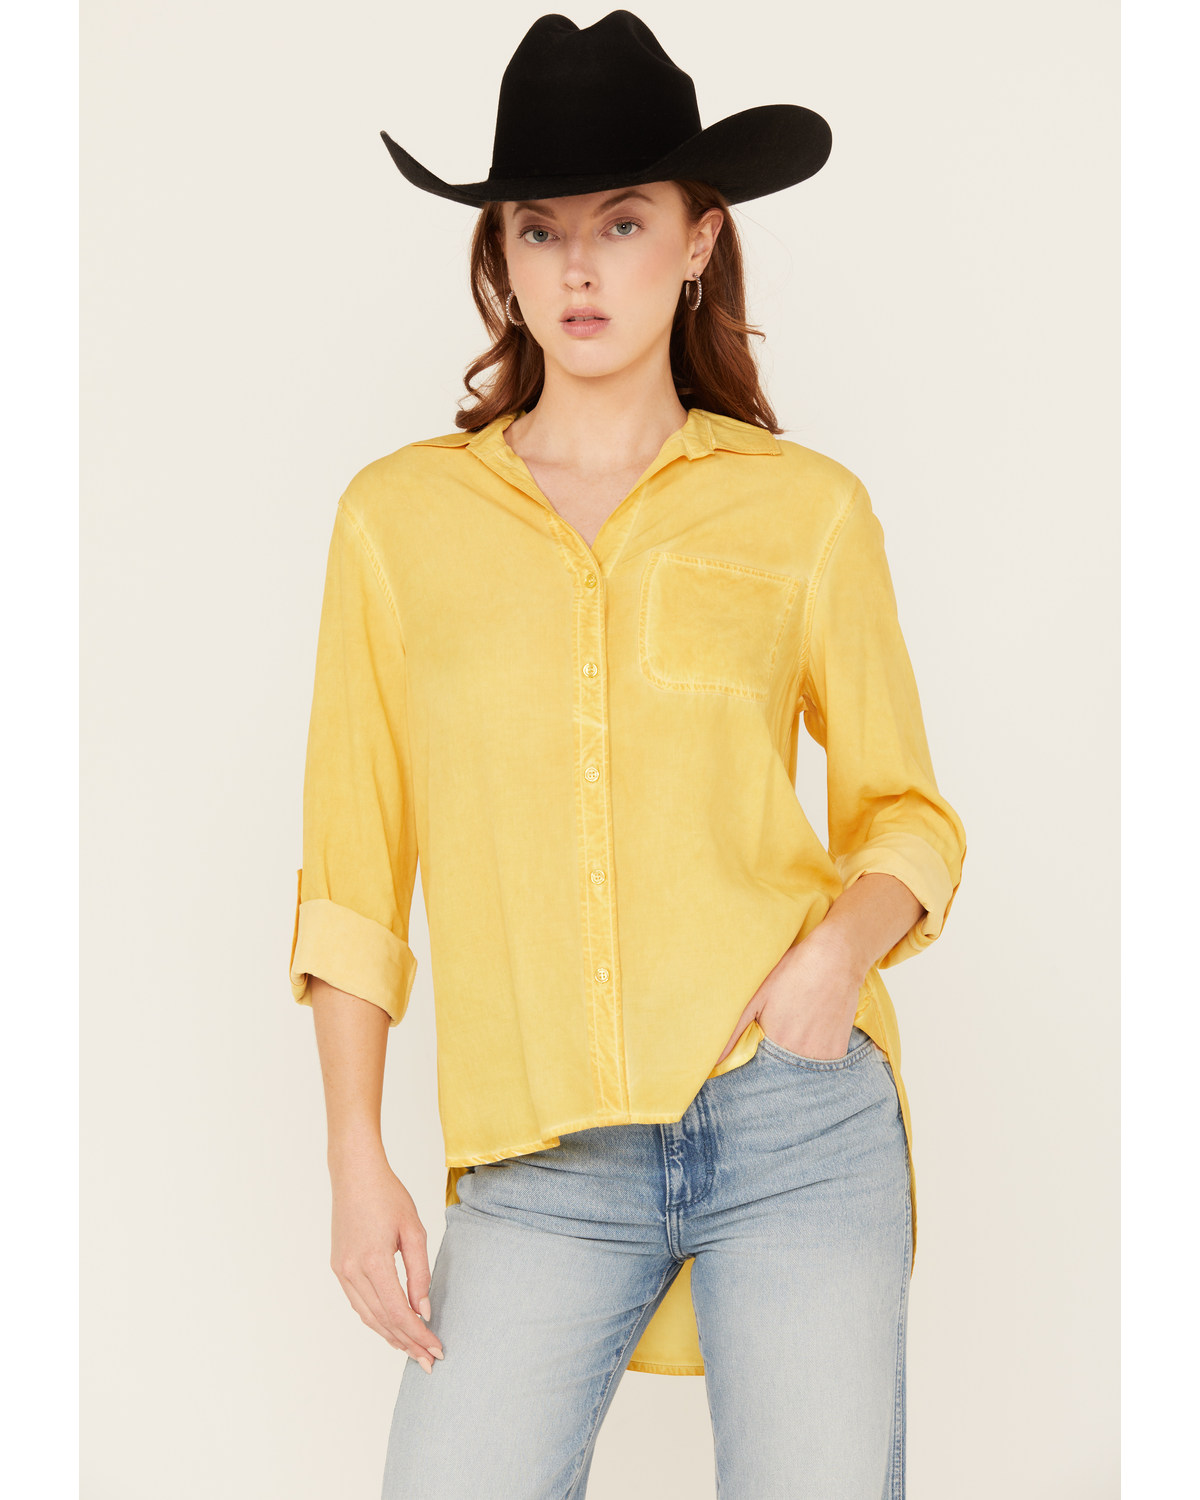 Velvet Heart Women's Washed Out Button Front Shirt